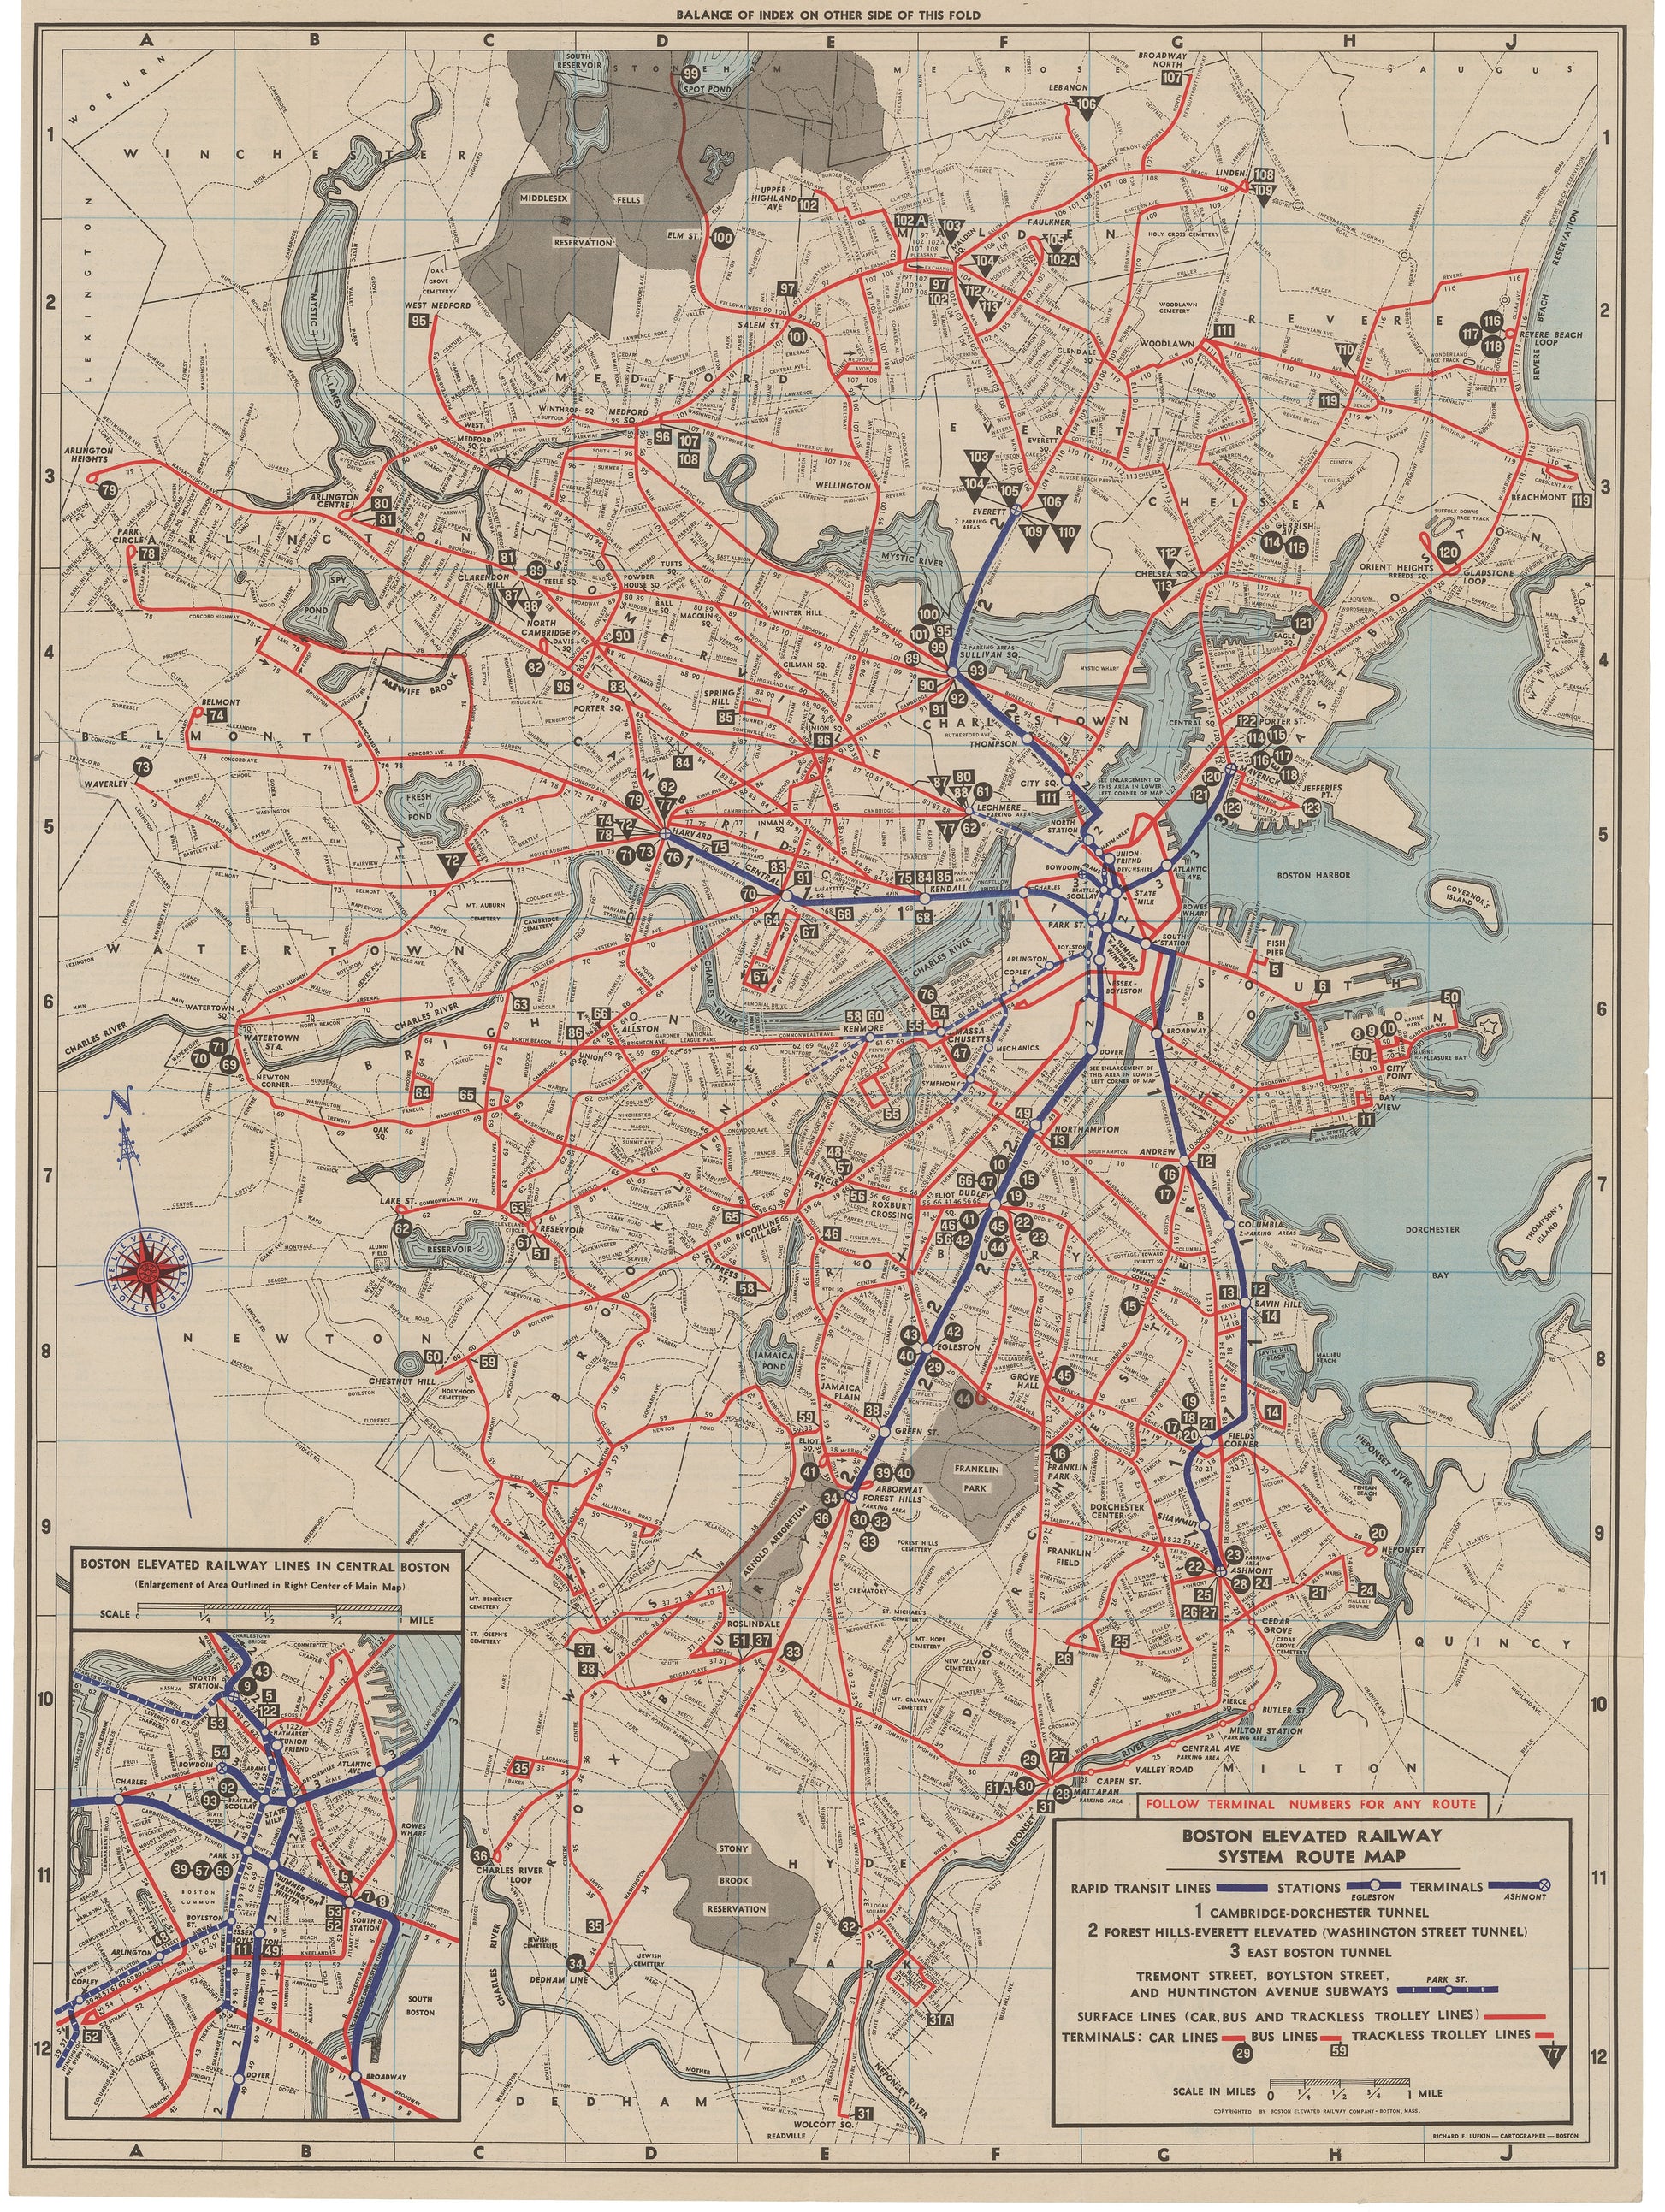 1943 Boston Elevated Railway Co. System Map No. 6